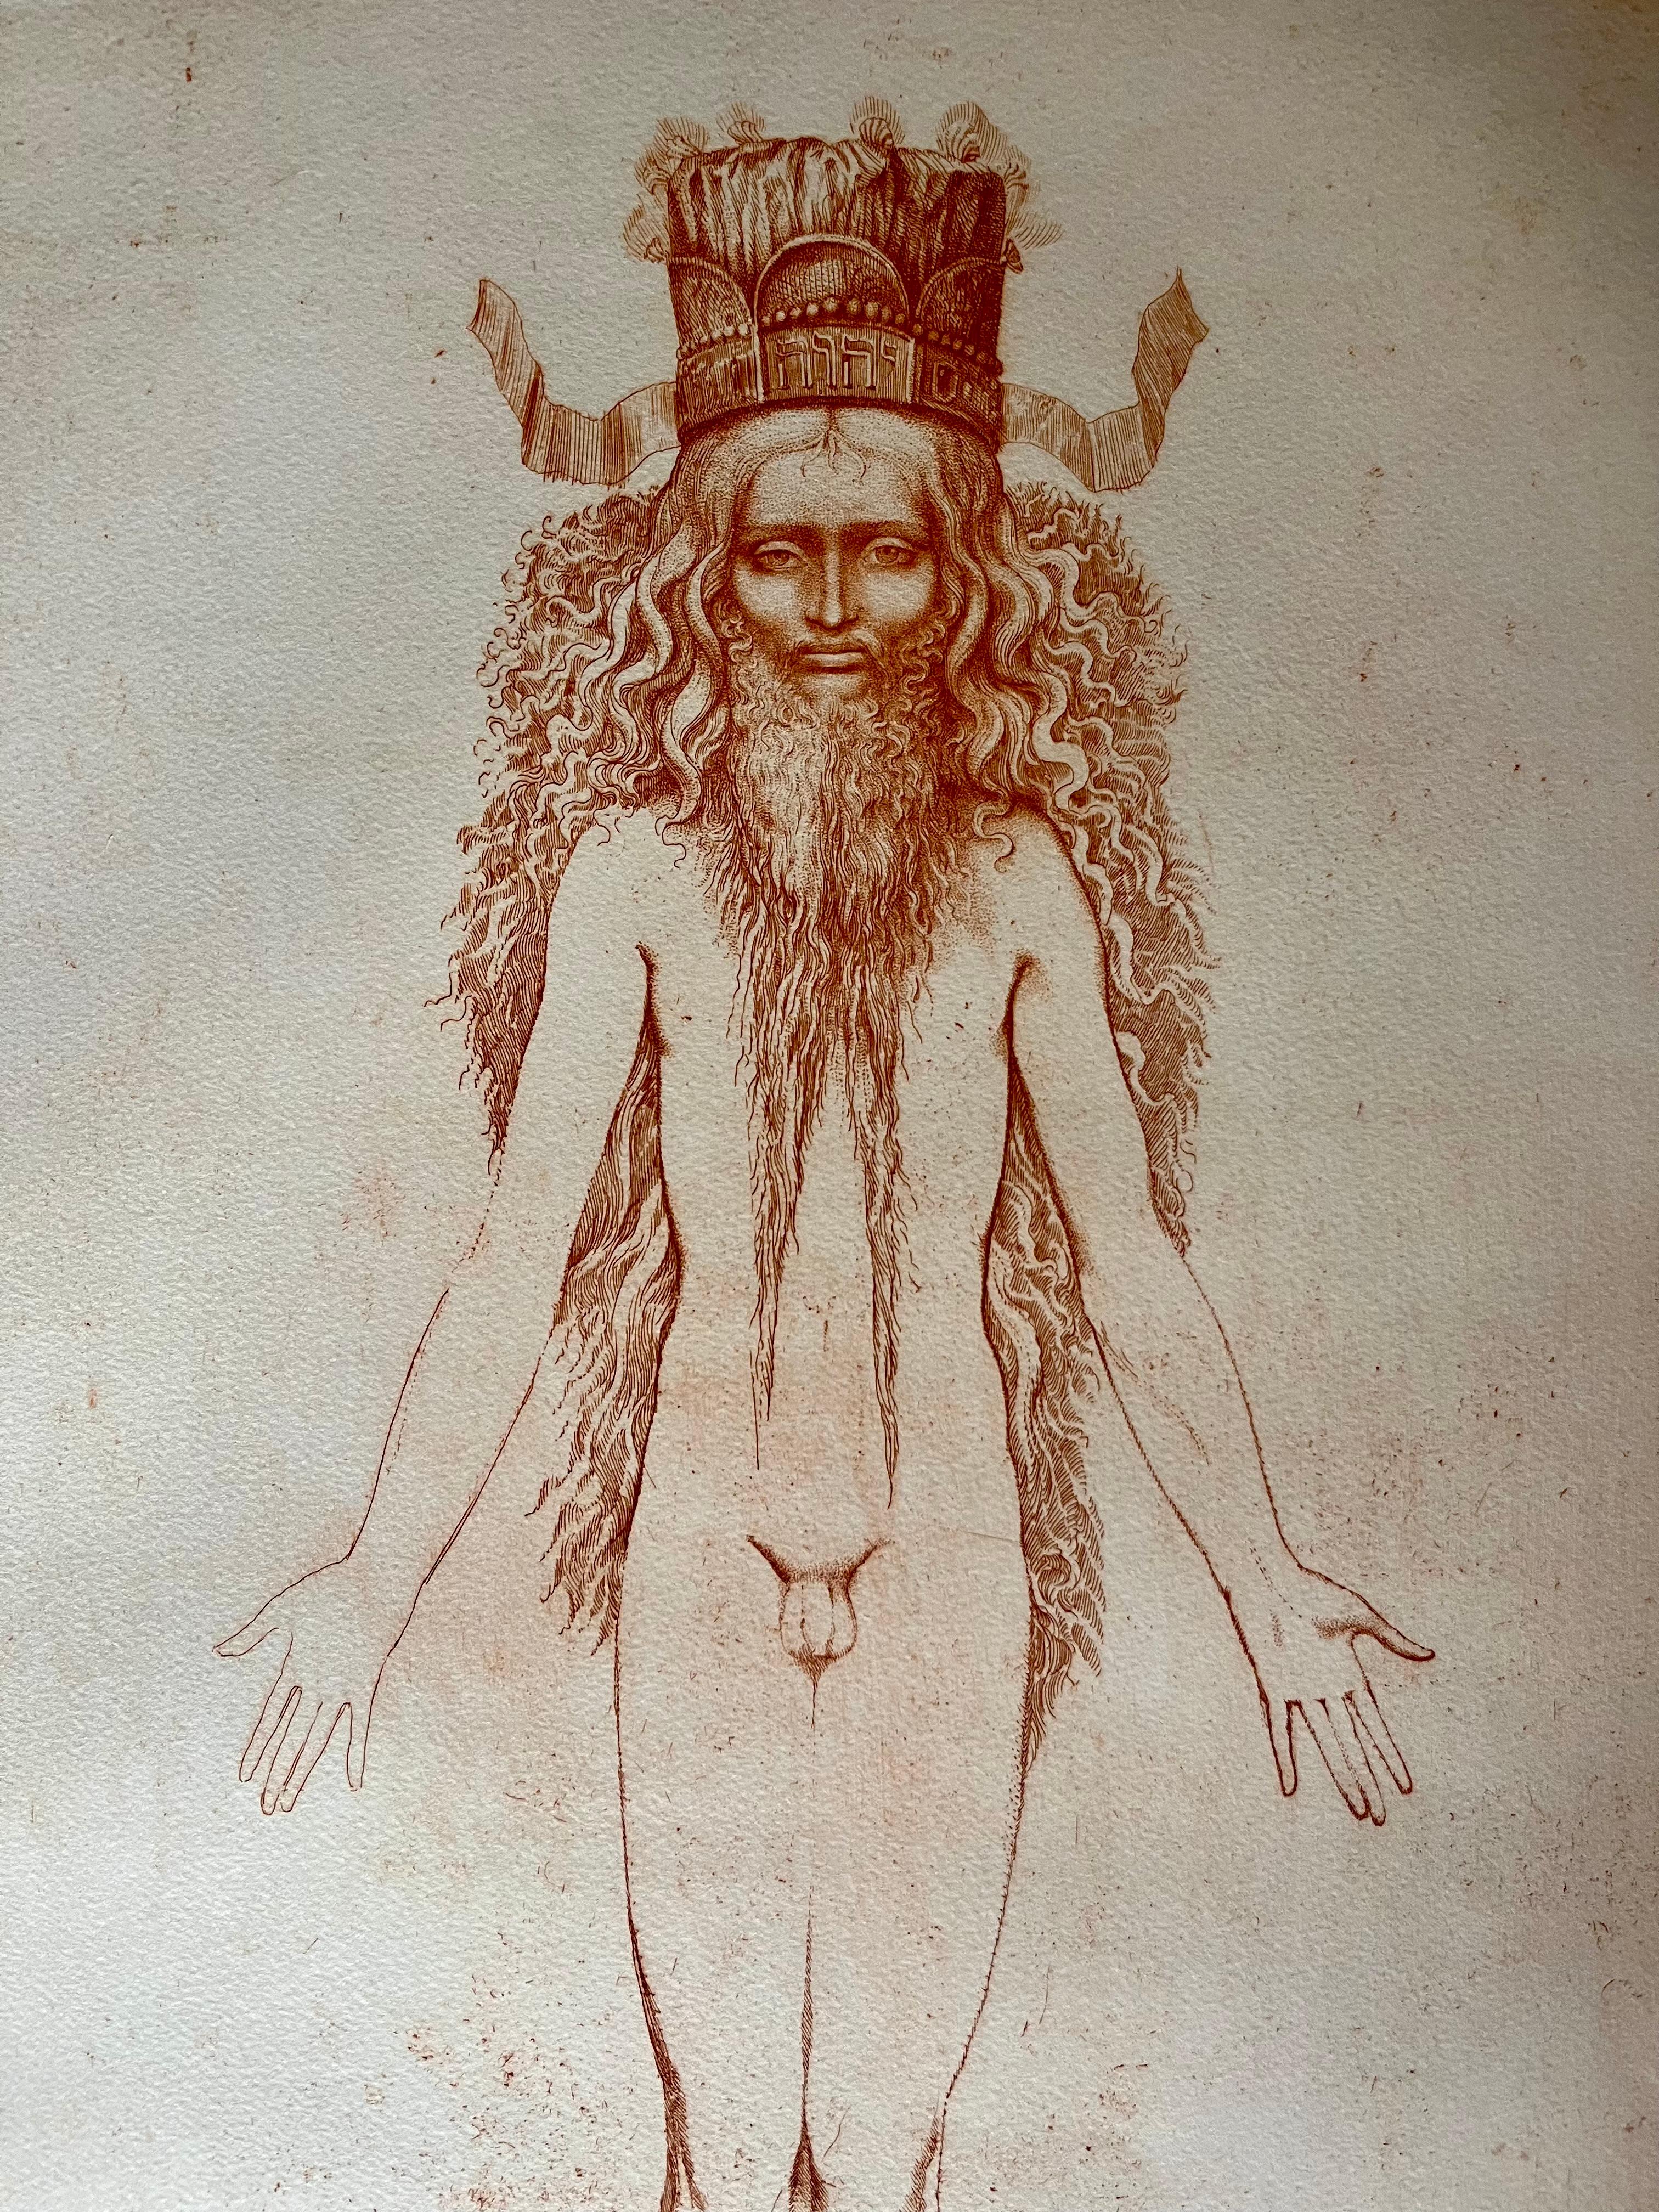 Original engraving #7 by Ernst FUCHS from Kabbalah (THIRTY-TWO PATHS OF WISDOM by SEFER YETZIRA), 1978
Etching signed and numbered 16/30 E.A.
Page size - 30 x 22 in  76 x 56 cm
Image size - 21 x 12.50 in x 53 x 32 cm

This collector's piece, printed